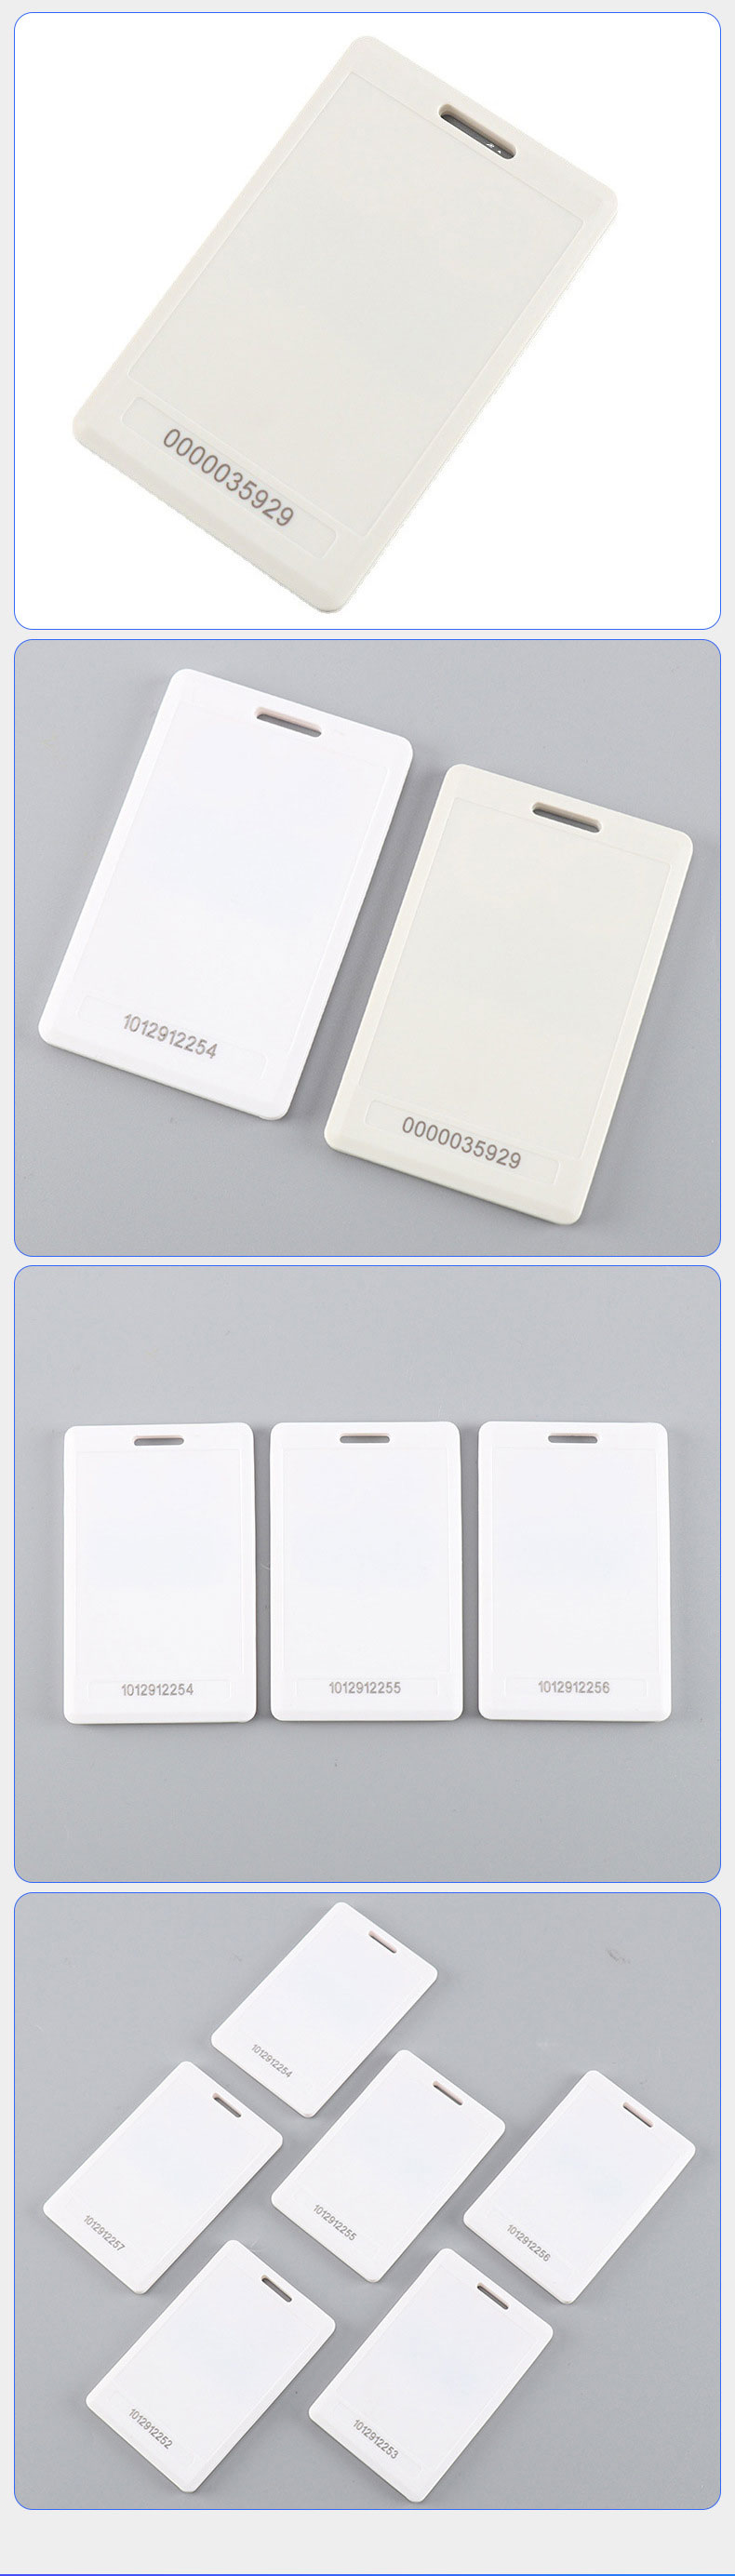 2.4G microwave RFID active electronic tag long-distance identification radio frequency card home school communication personnel positioning management